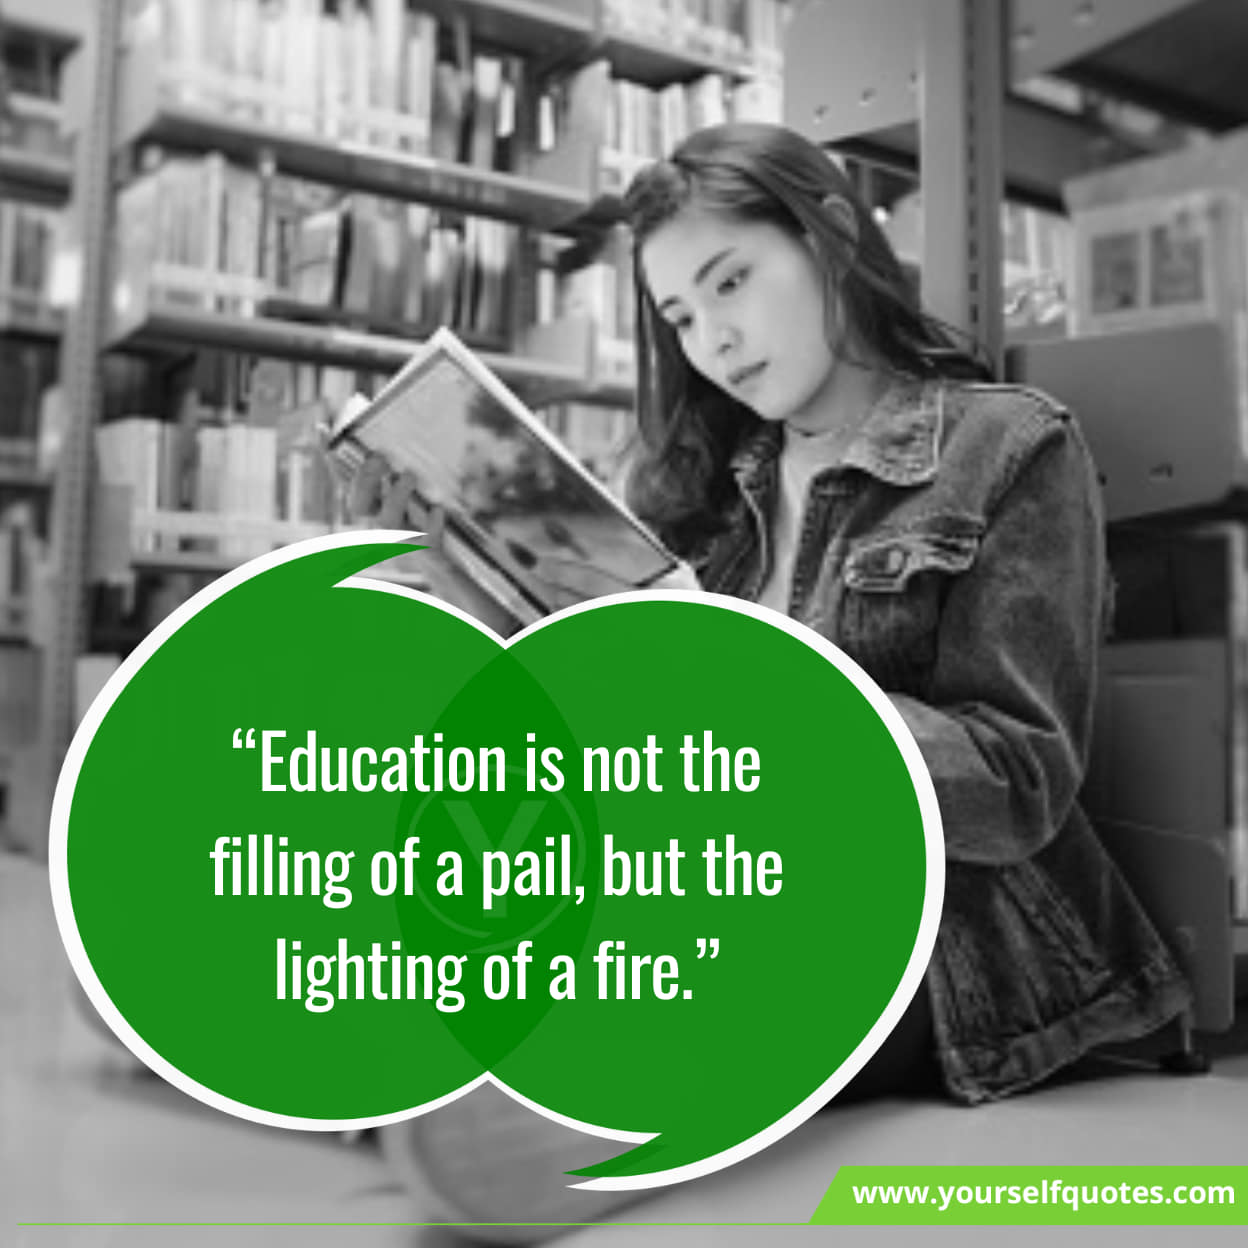 Best Educational Quotes On Students